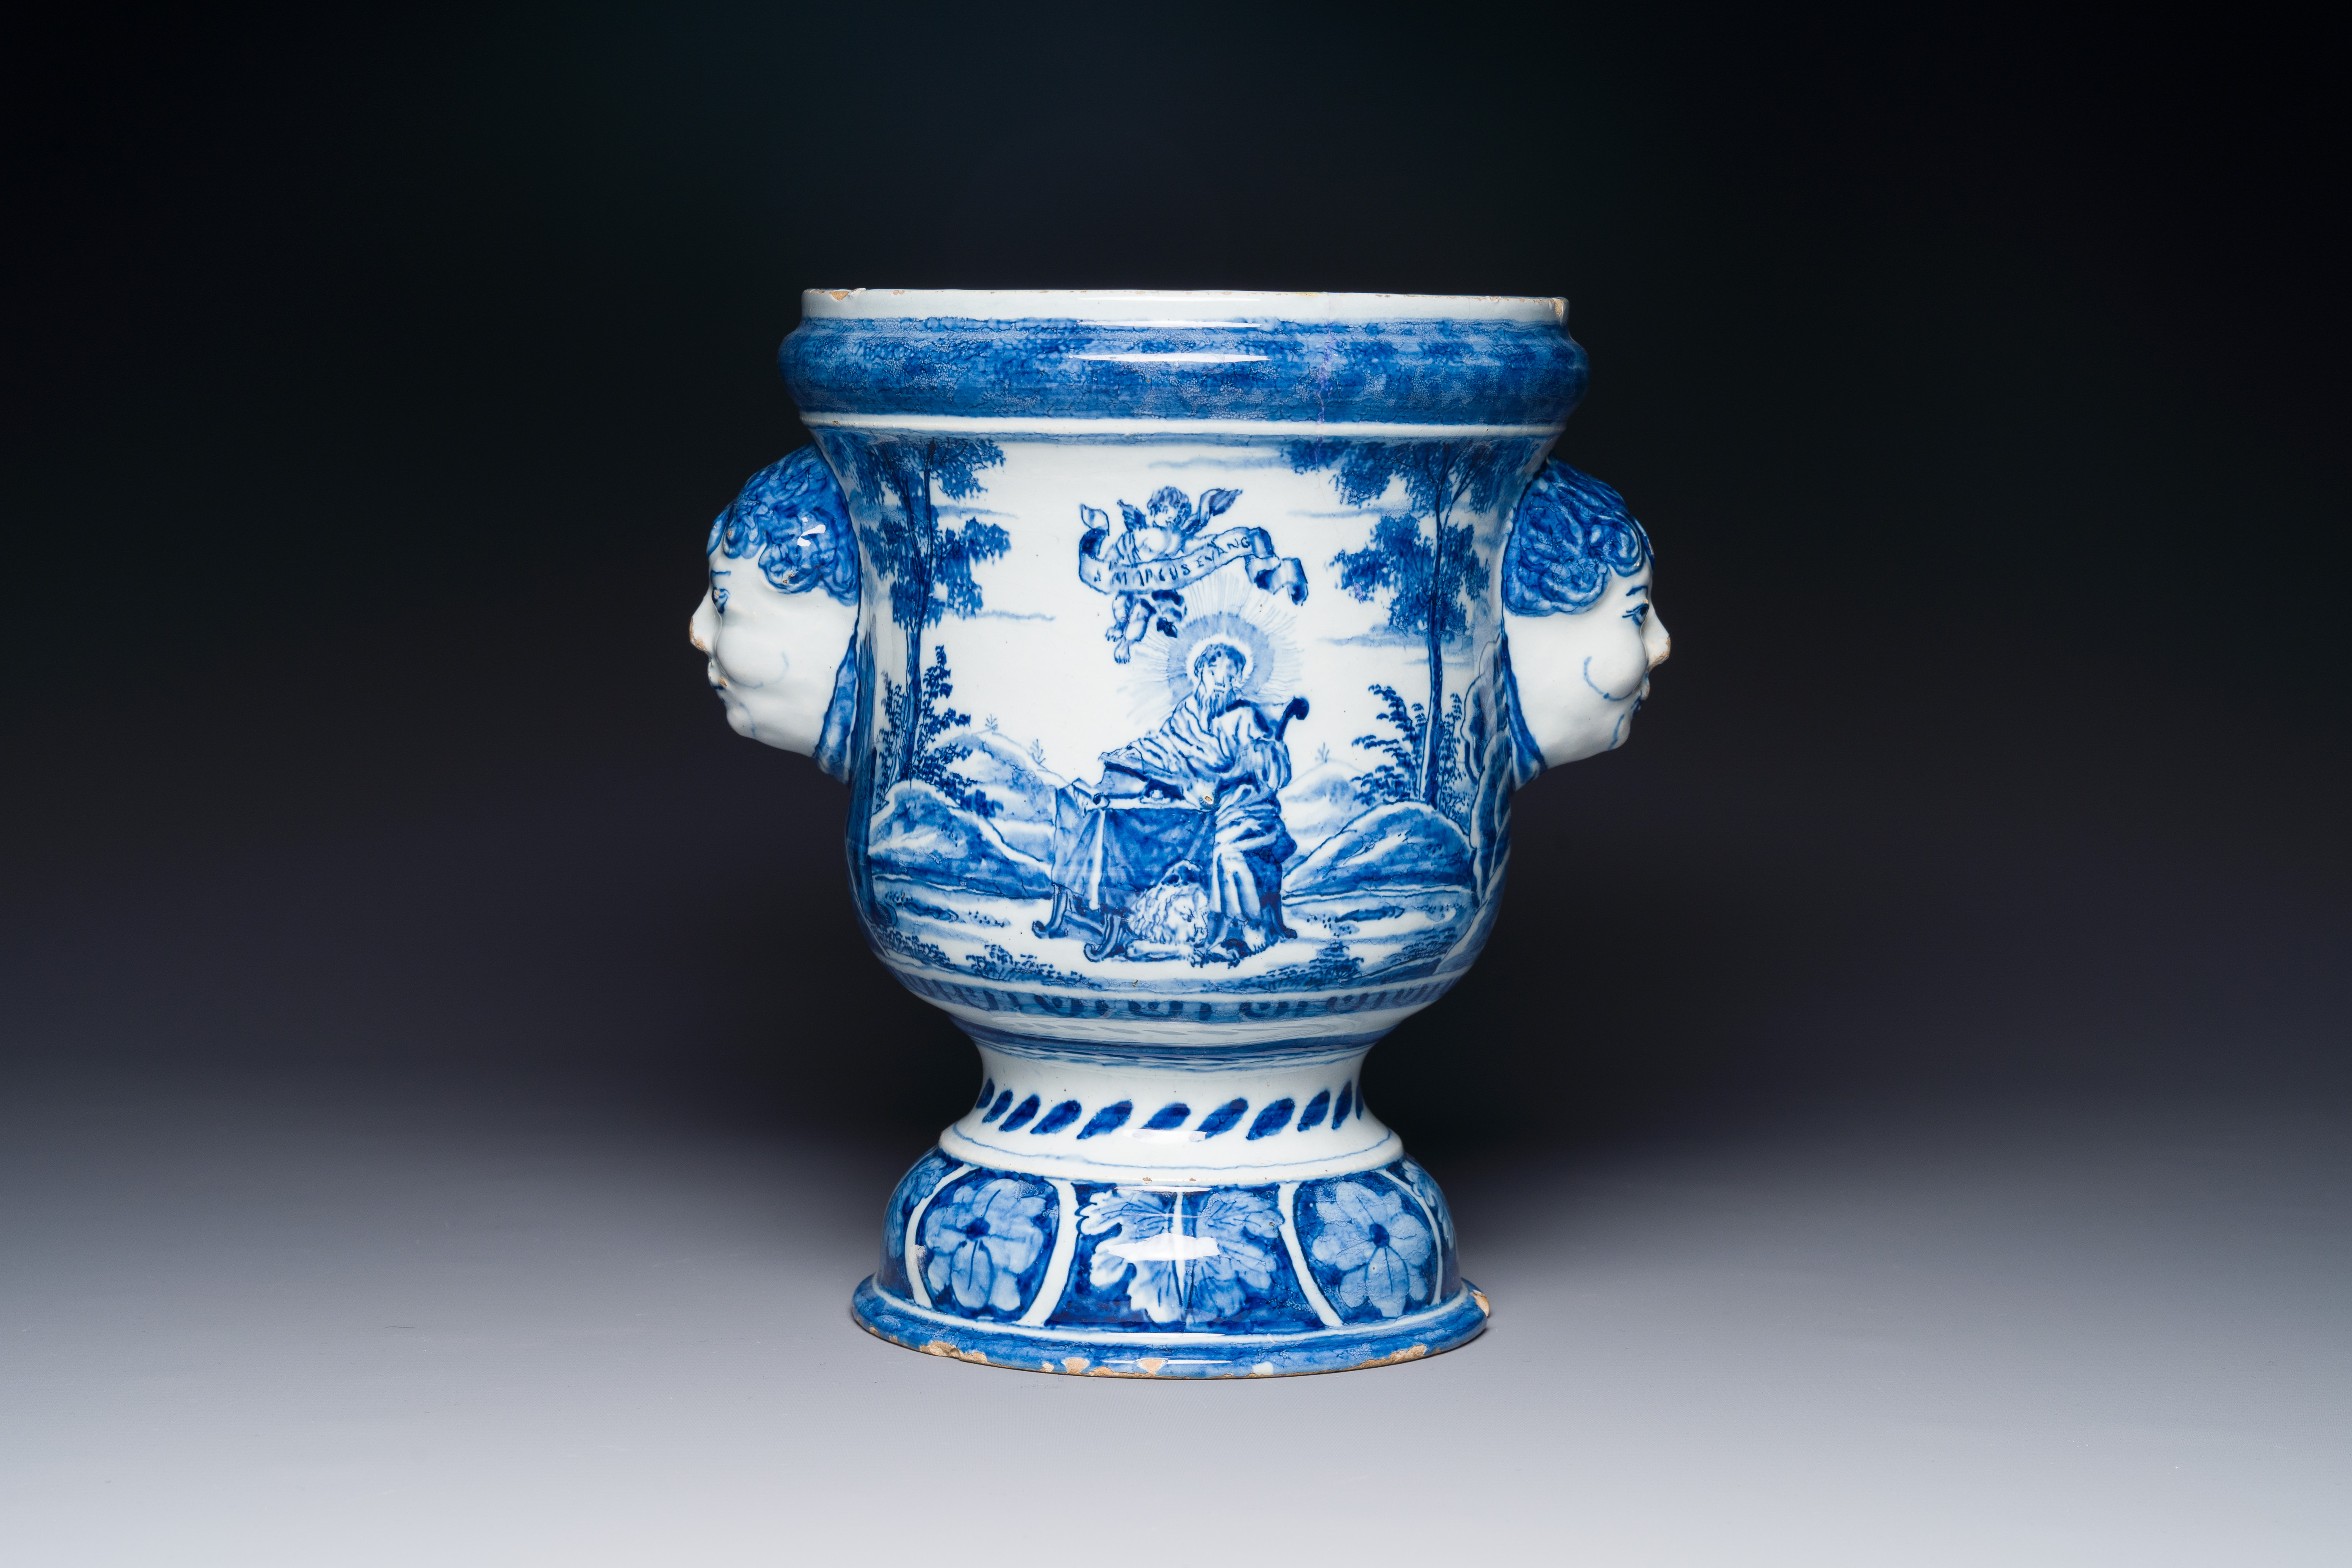 A Dutch Delft blue and white jardiniere depicting Saint Willibrord and John the Baptist, 18th C. - Image 4 of 7